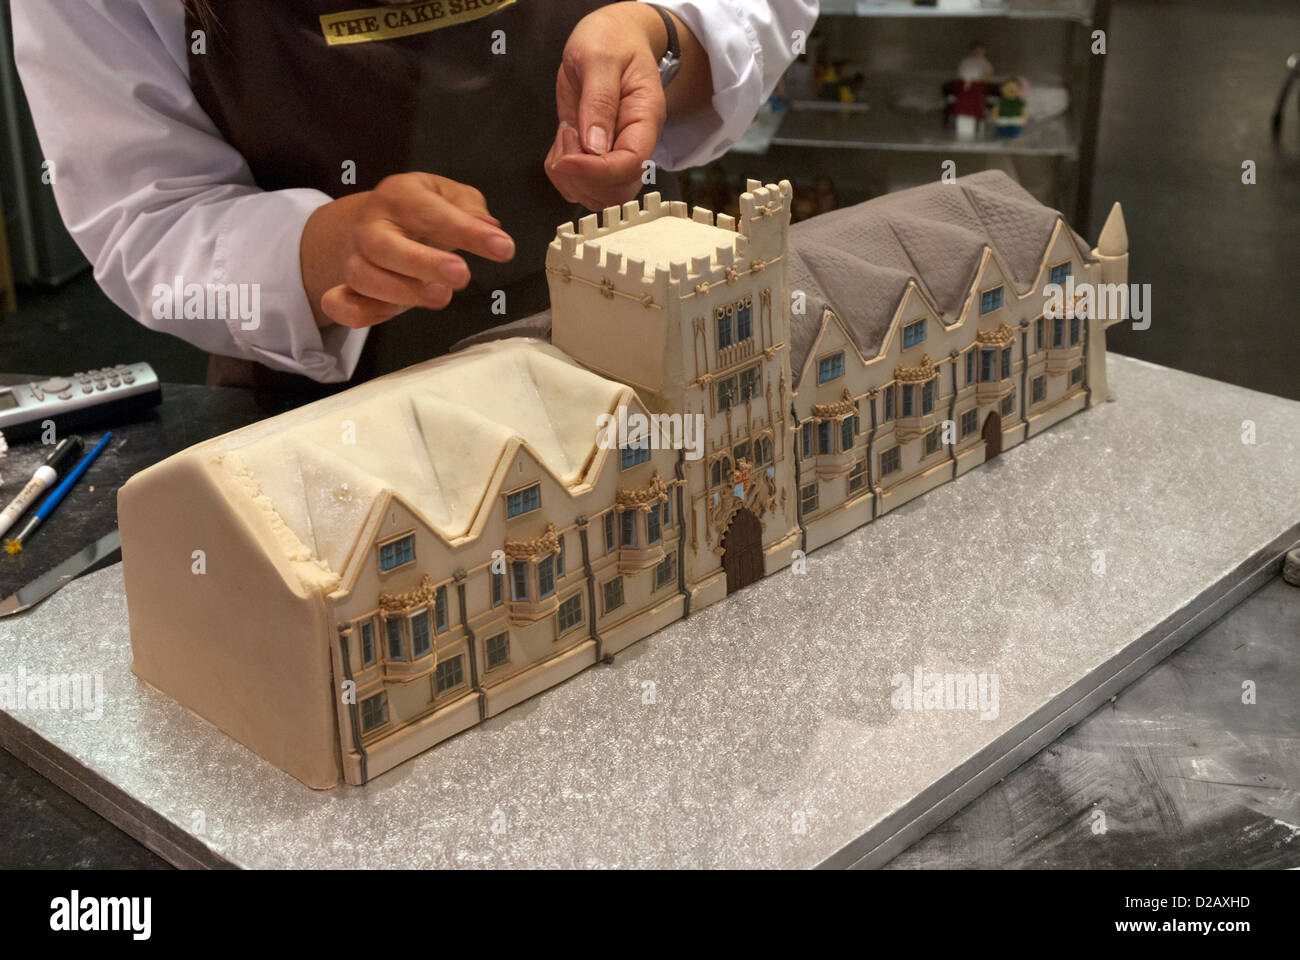 A cake being made in the shape of Brasenose College, in a cake shop in the Covered Market, Oxford, Oxfordshire, England, UK Stock Photo